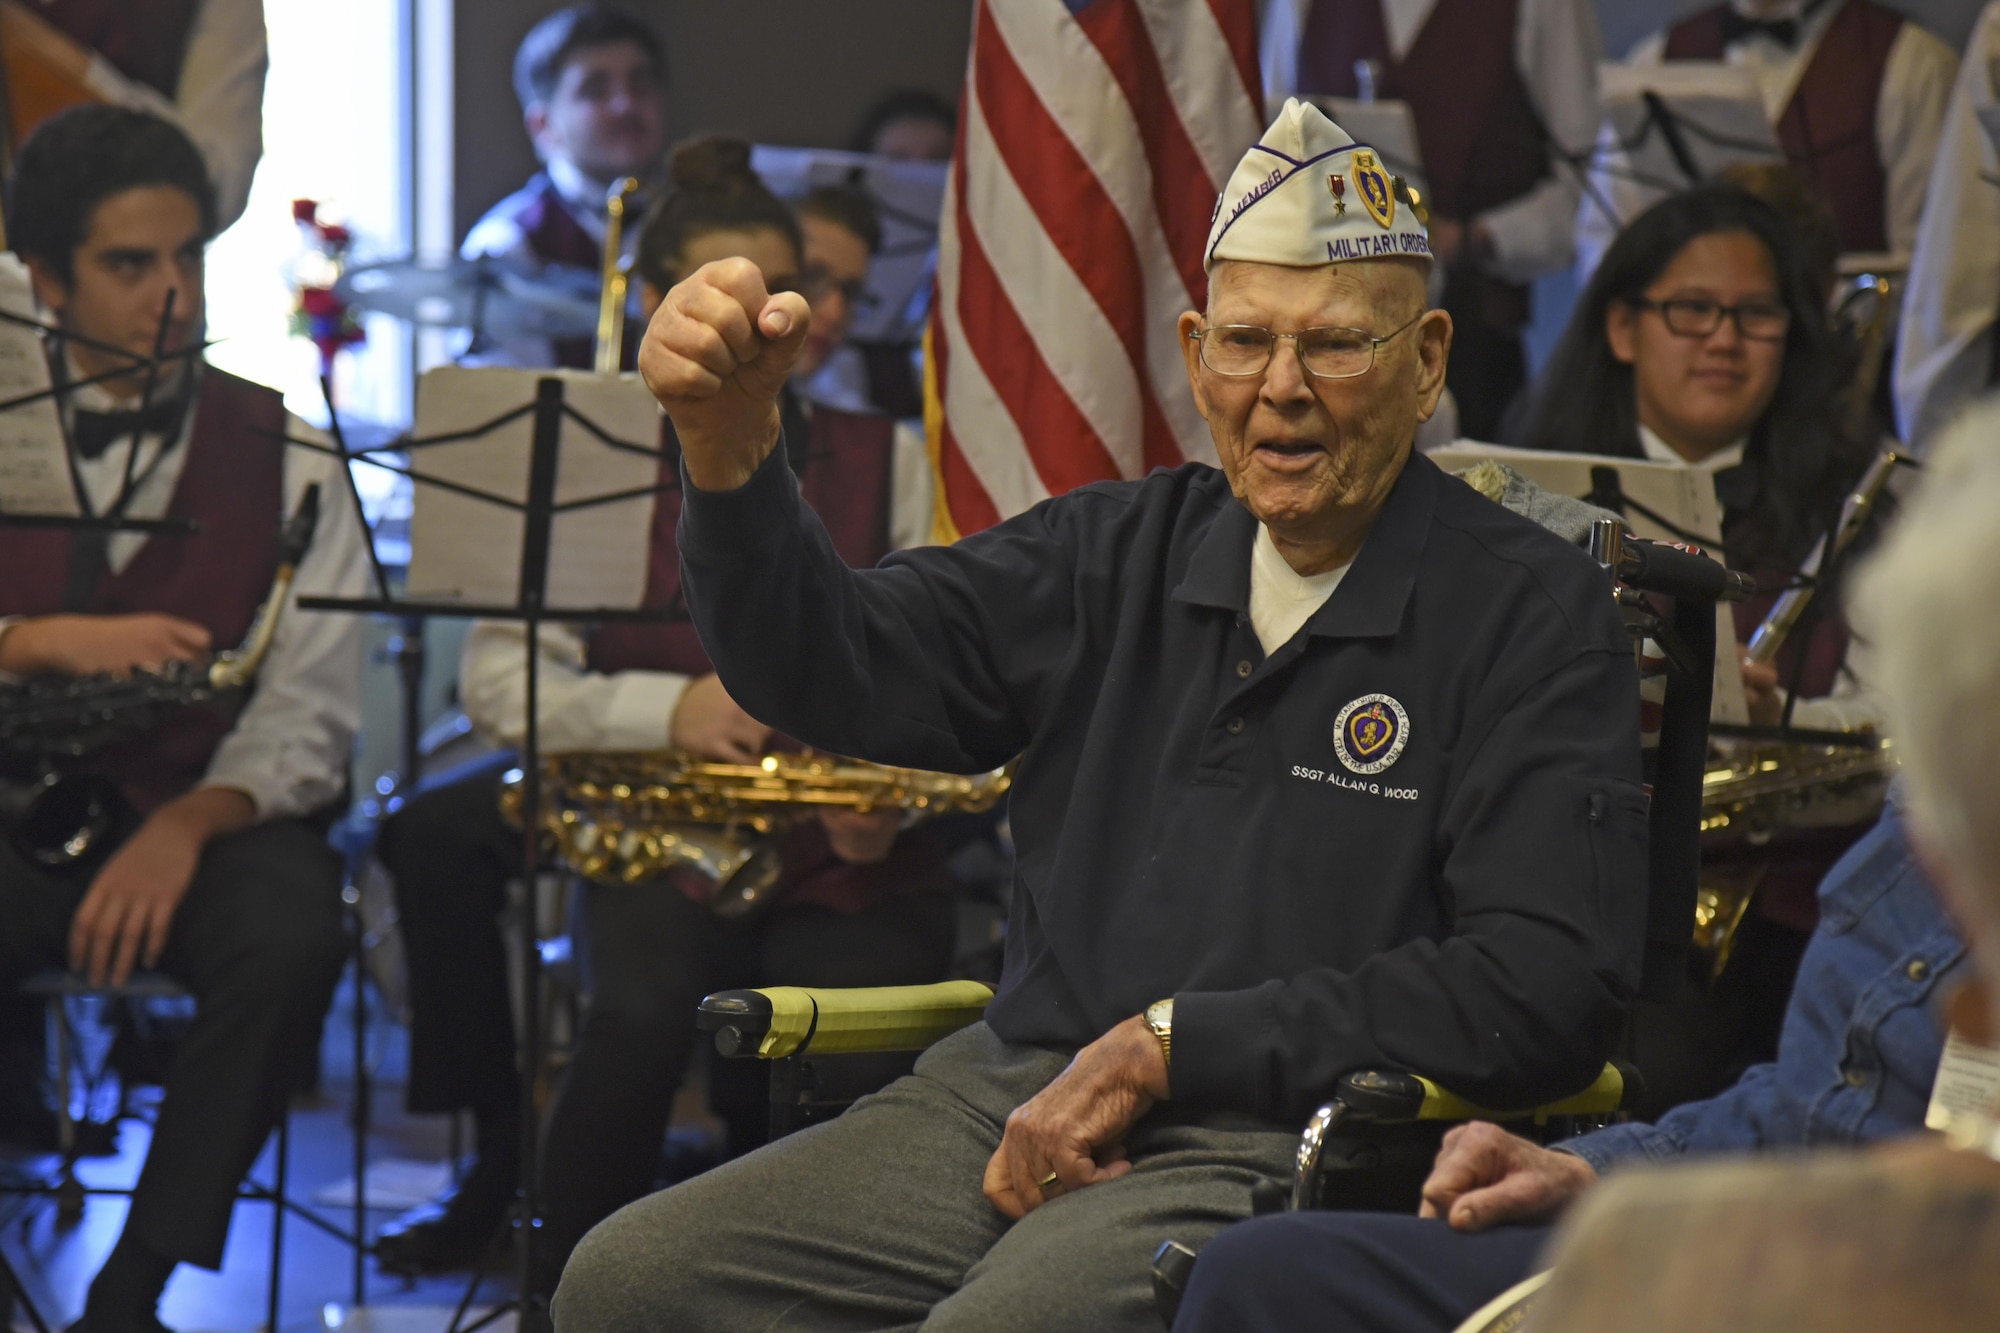 Retired Staff Sgt. Allen G. Wood, United States Army, celebrates during a Veterans Day celebration Nov. 12, 2016, at the Spokane Veterans Home. Wood was honored by the Combat Veterans Motorcycle Association for his years of service in the U.S. Army with the presentation of a handmade shadow box displaying medals received during the time of his service. (U.S. Air Force photo/Senior Airman Mackenzie Richardson)
